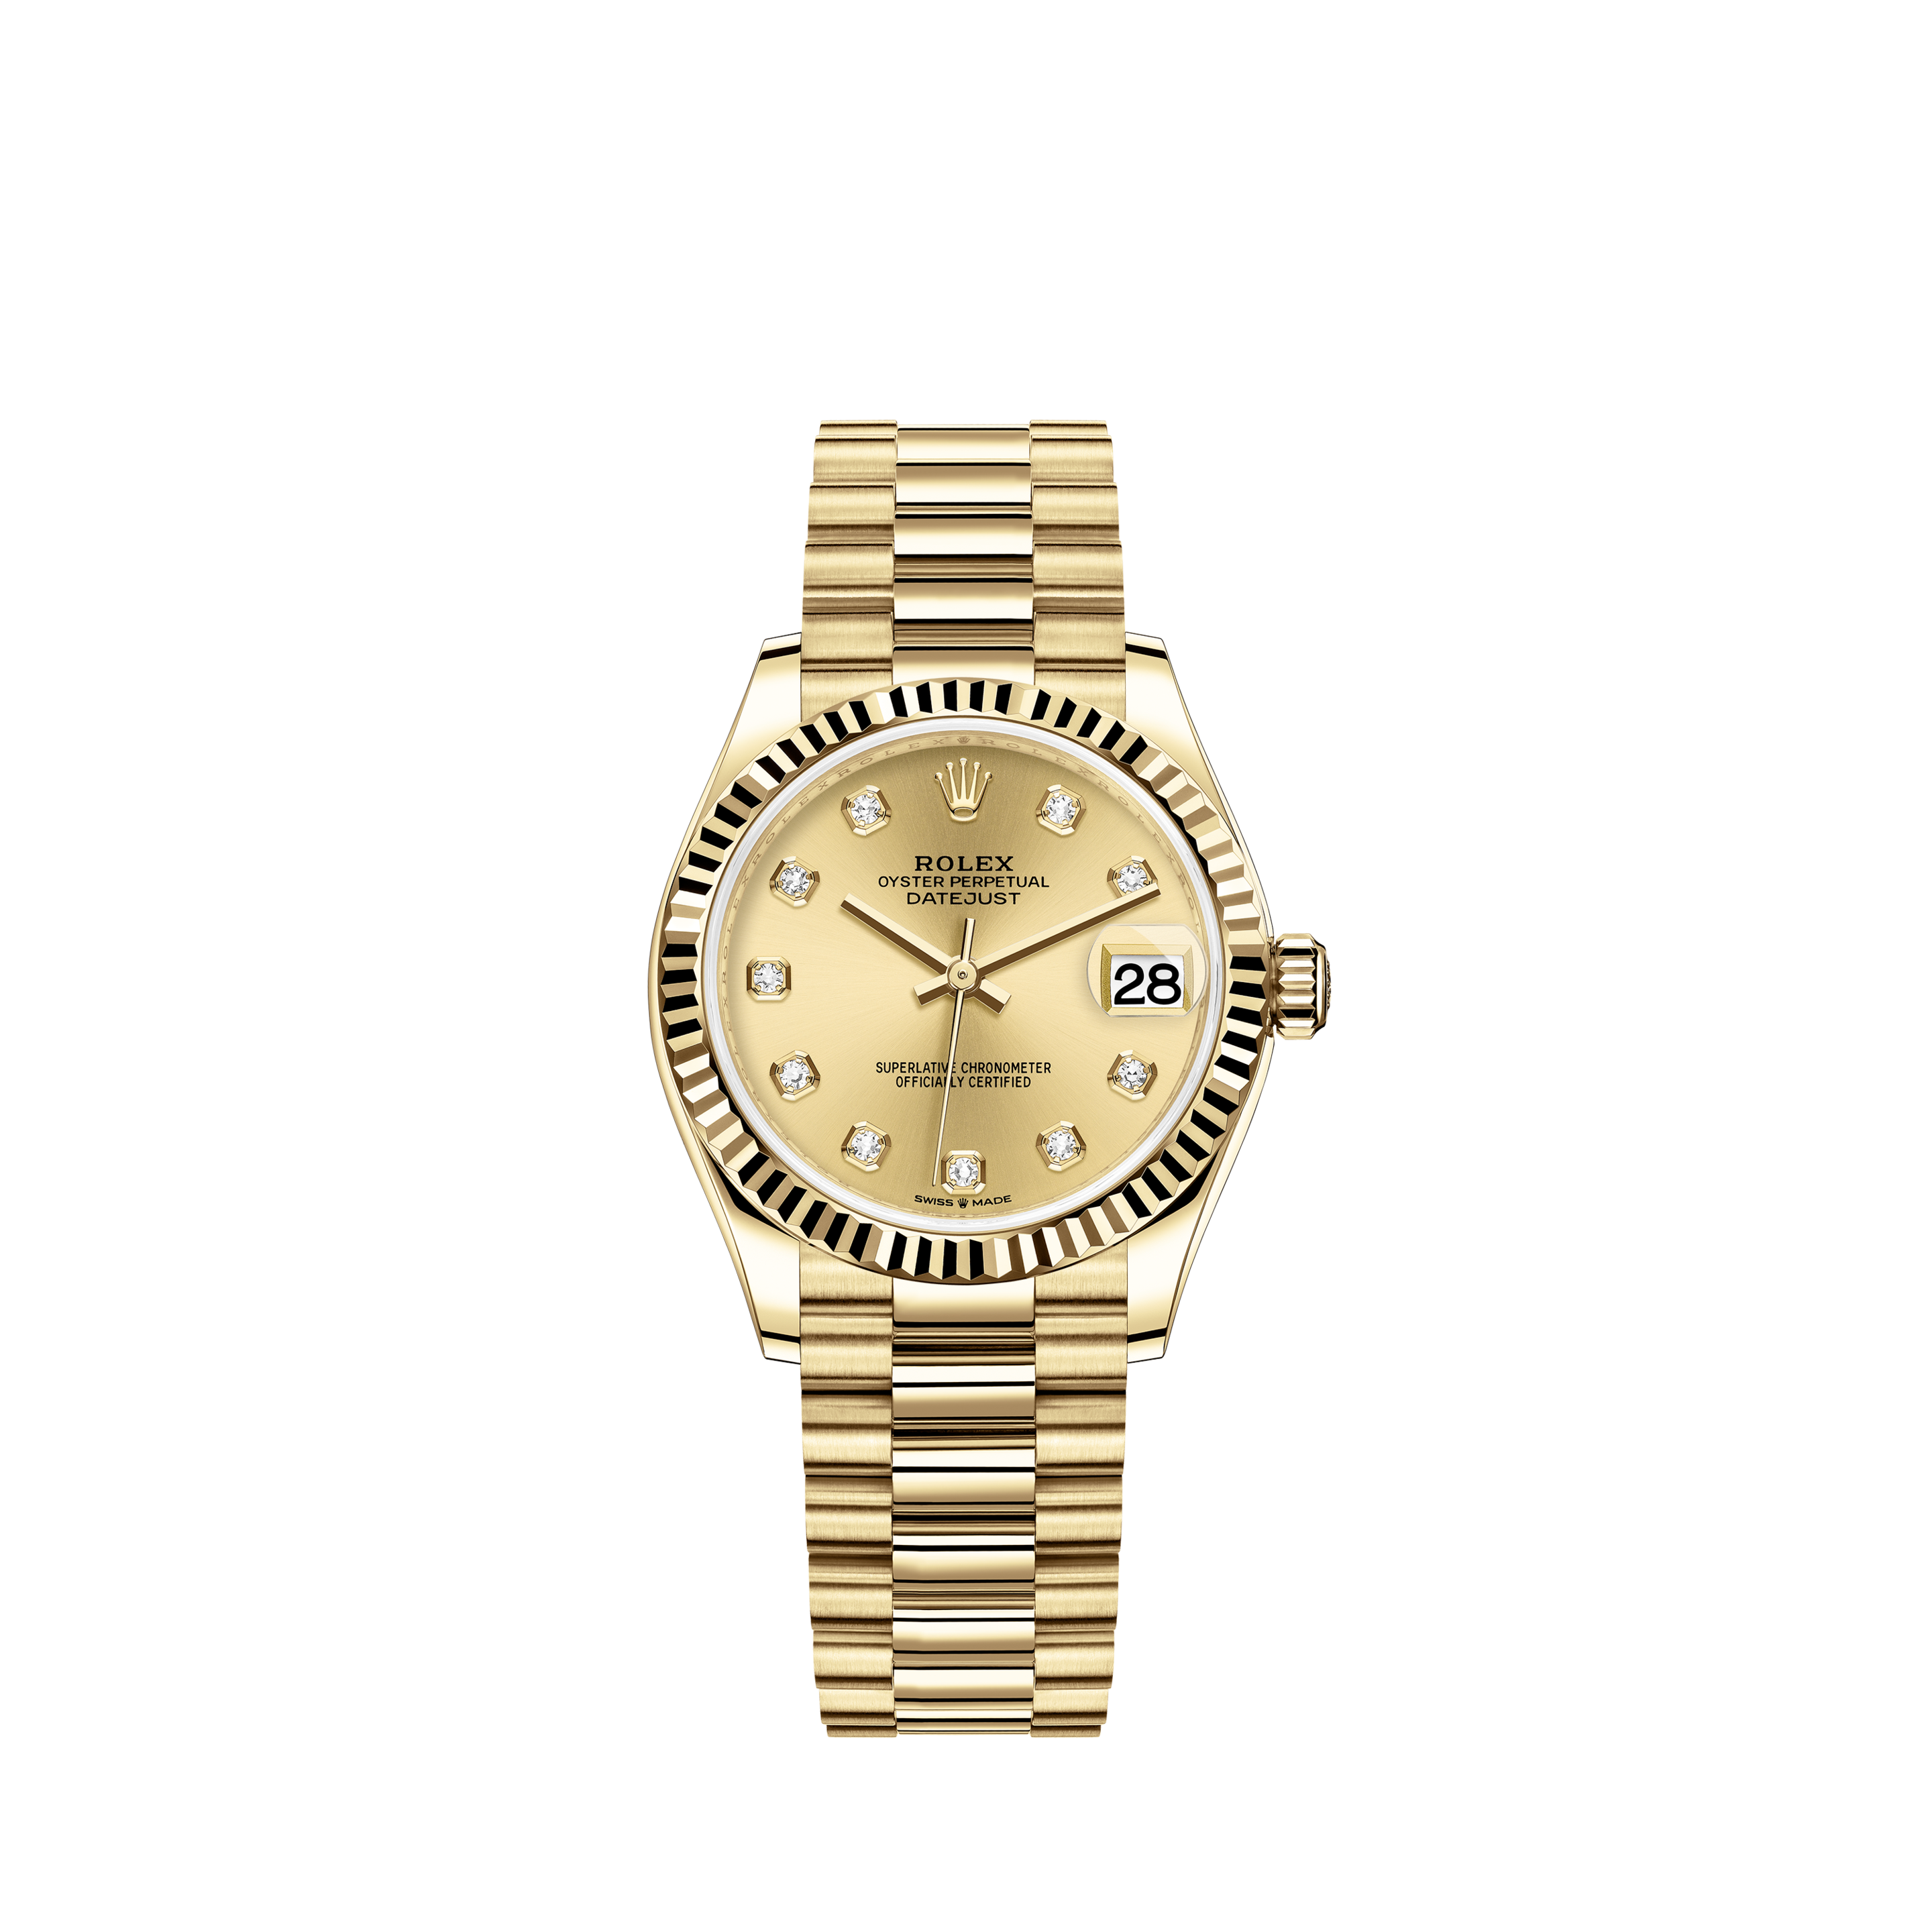 rolex oyster perpetual datejust superlative chronometer officially certified prix